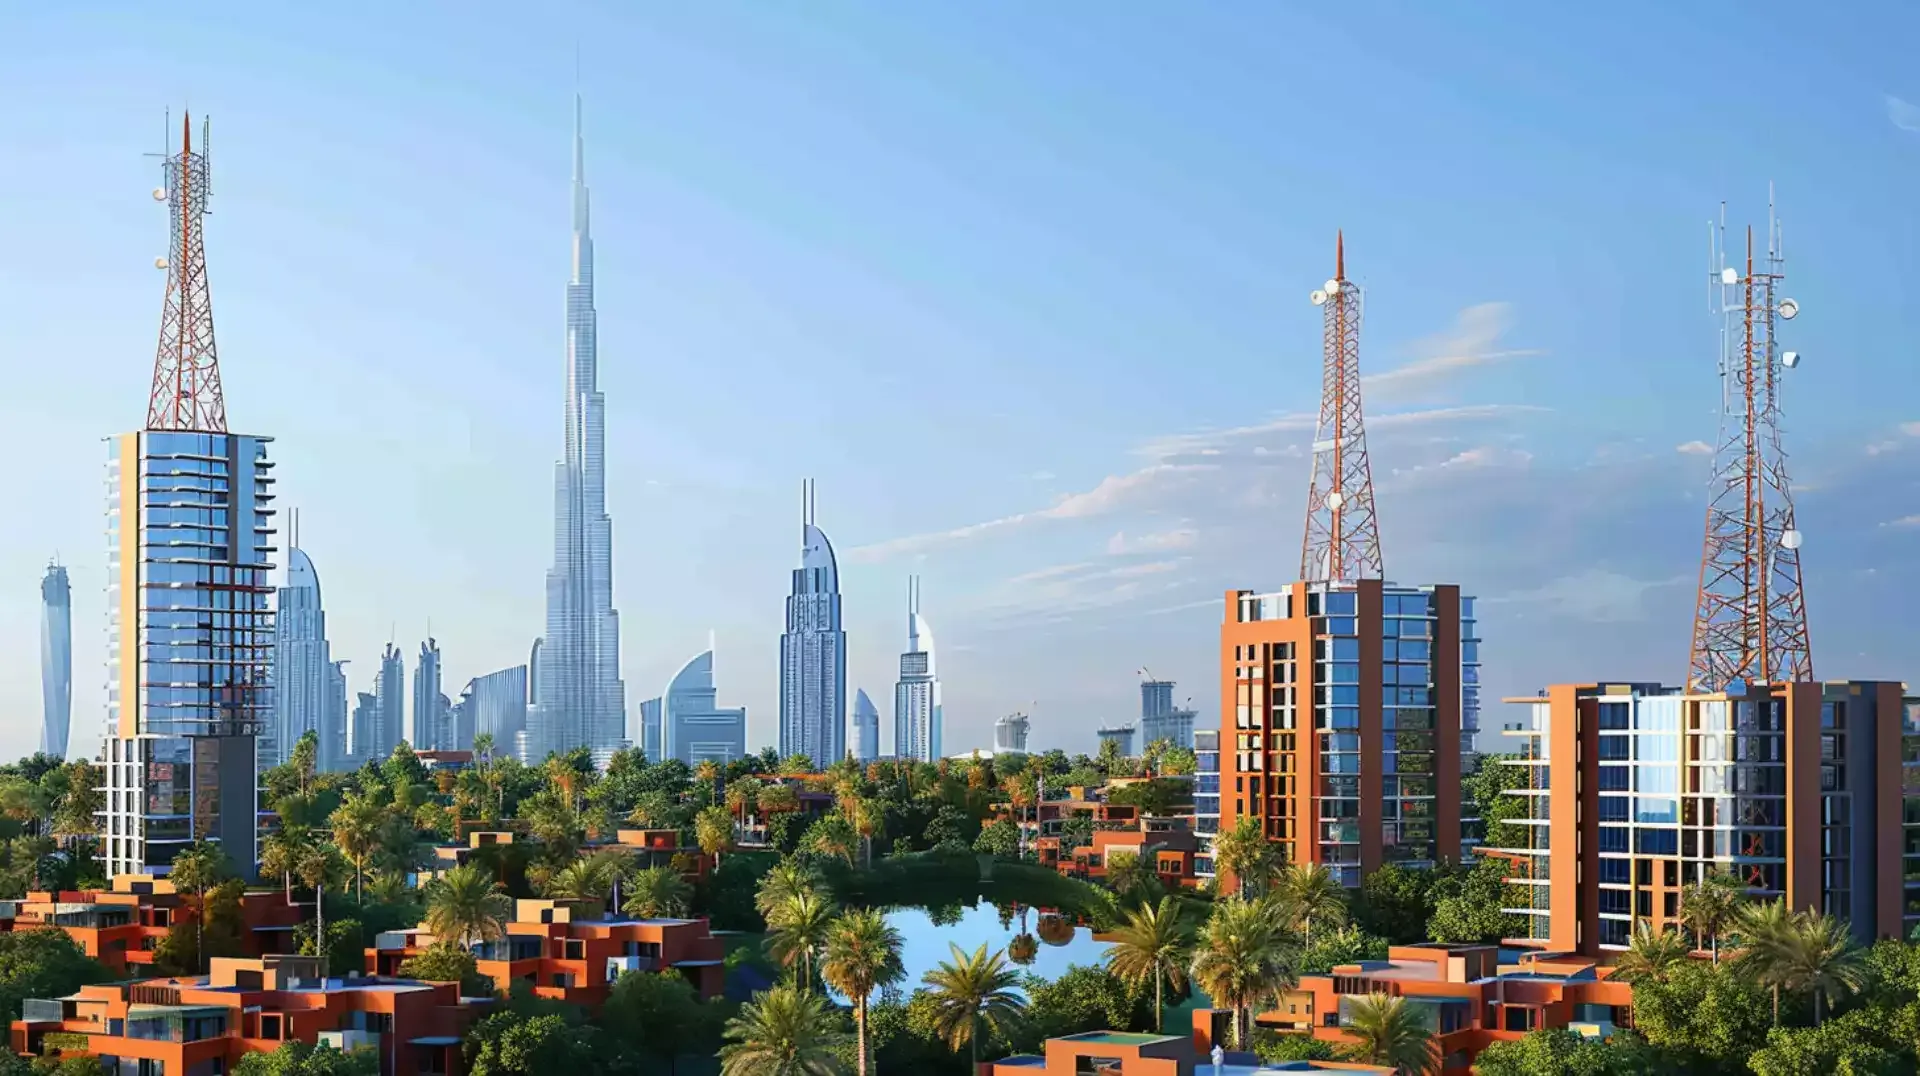 Telecom equipment against Dubai skyline, representing investment prospects in the sector